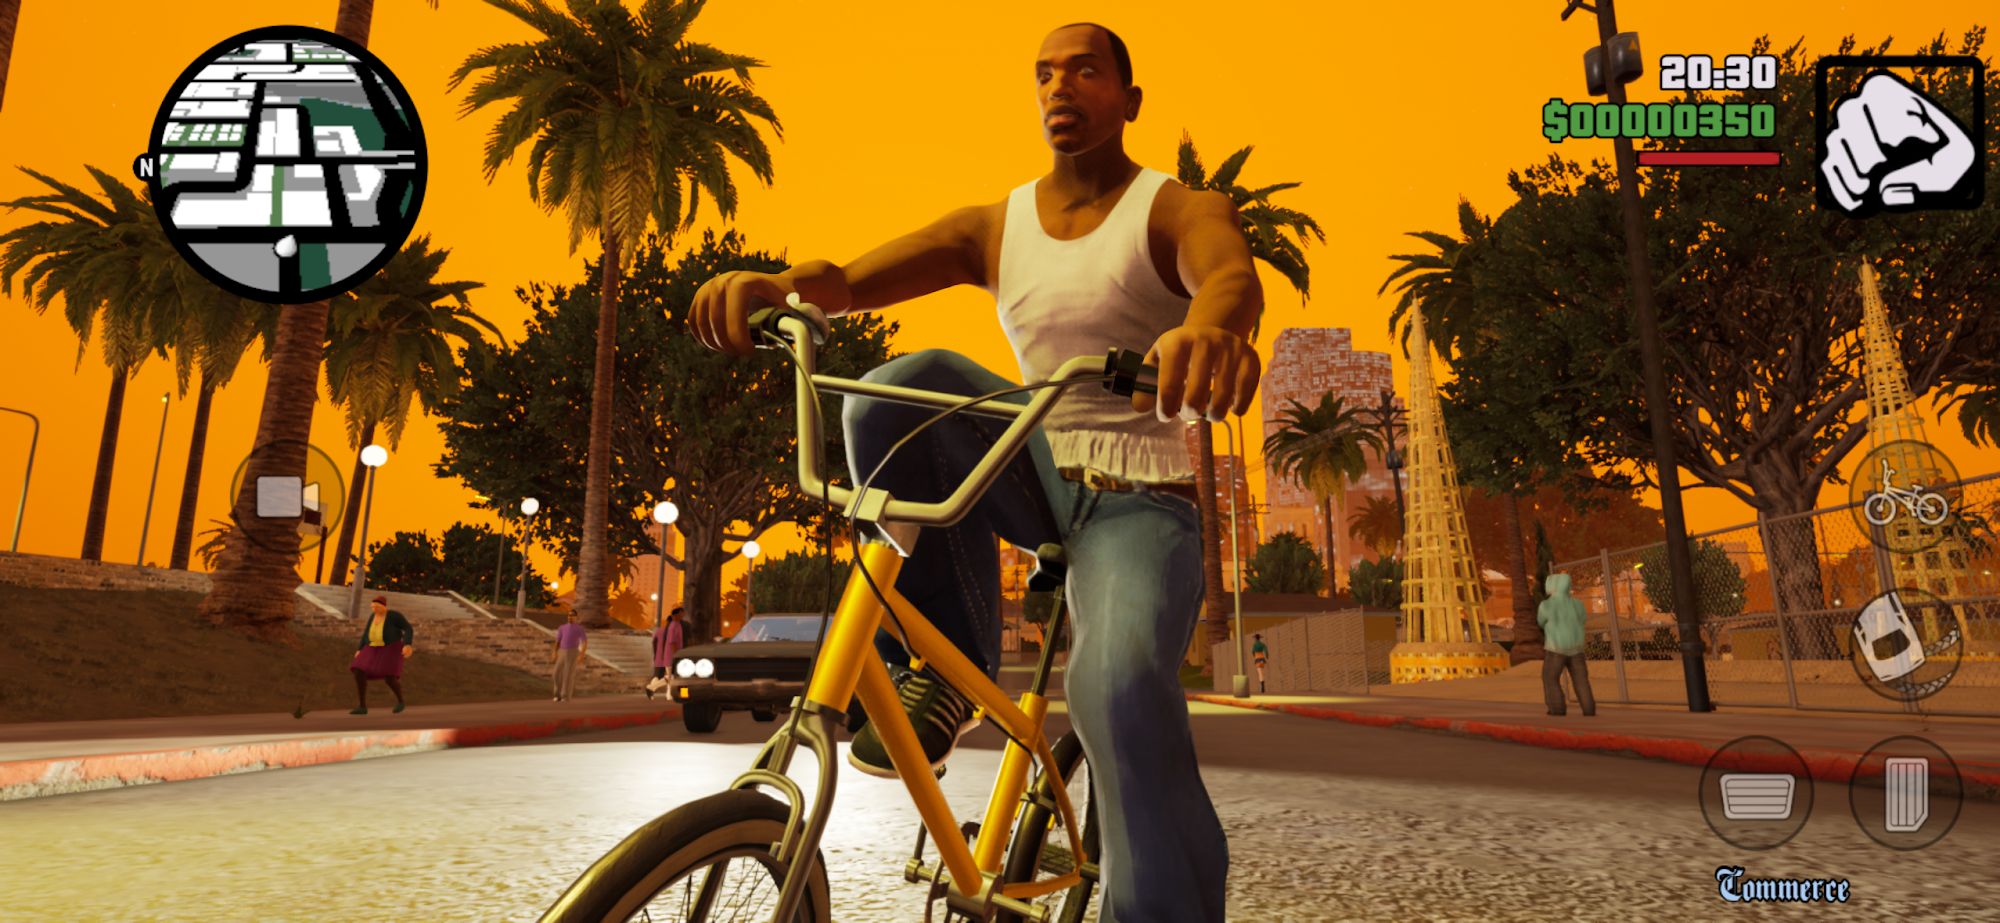 Gameplay of the GTA: San Andreas - Definitive for Android phone or tablet.